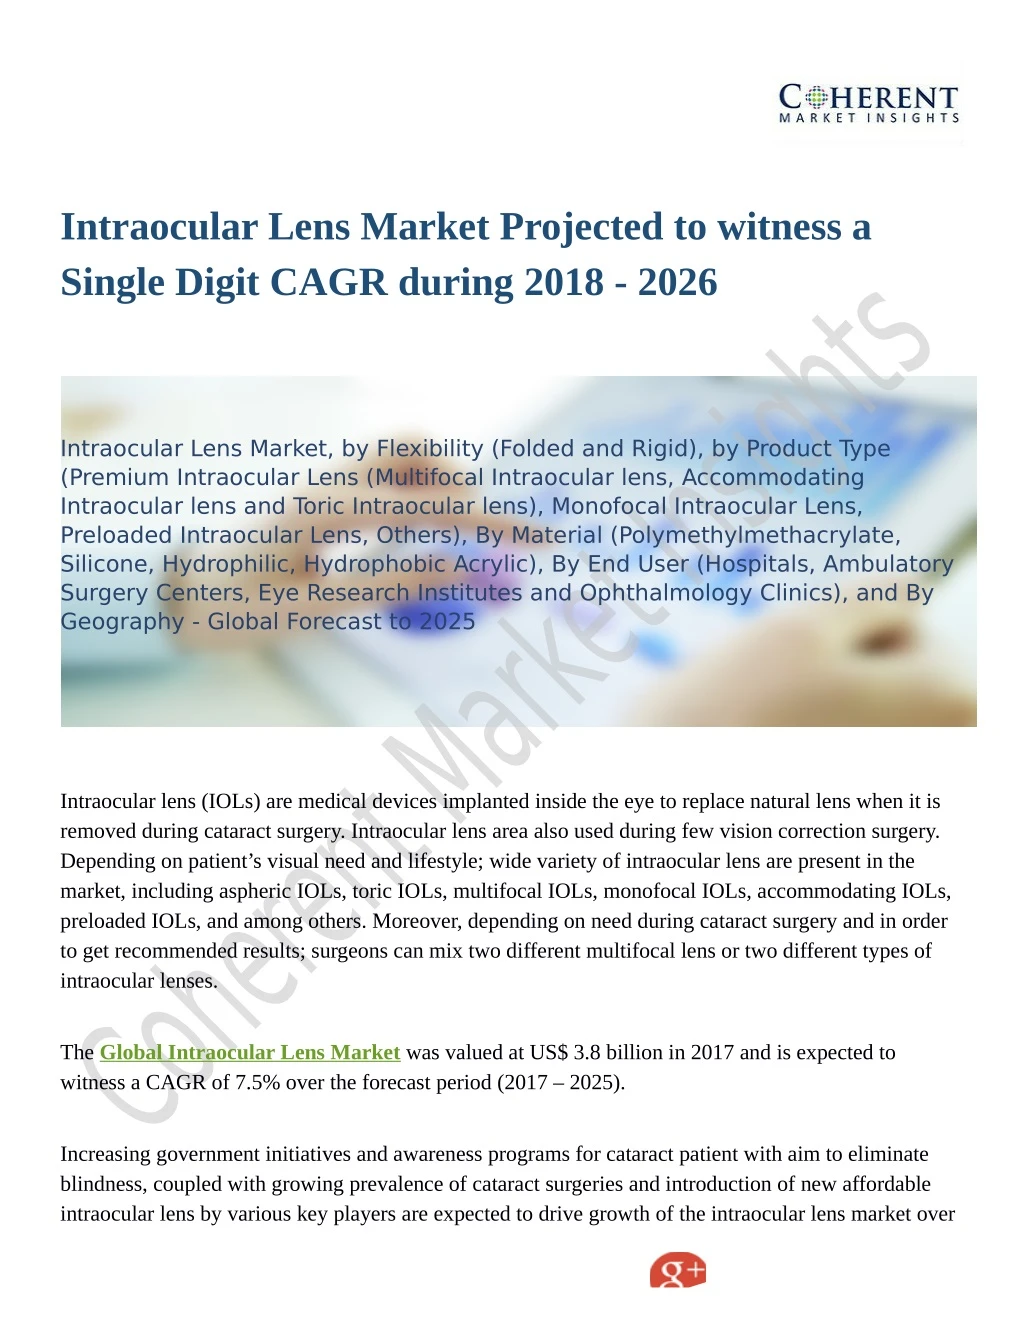 intraocular lens market projected to witness